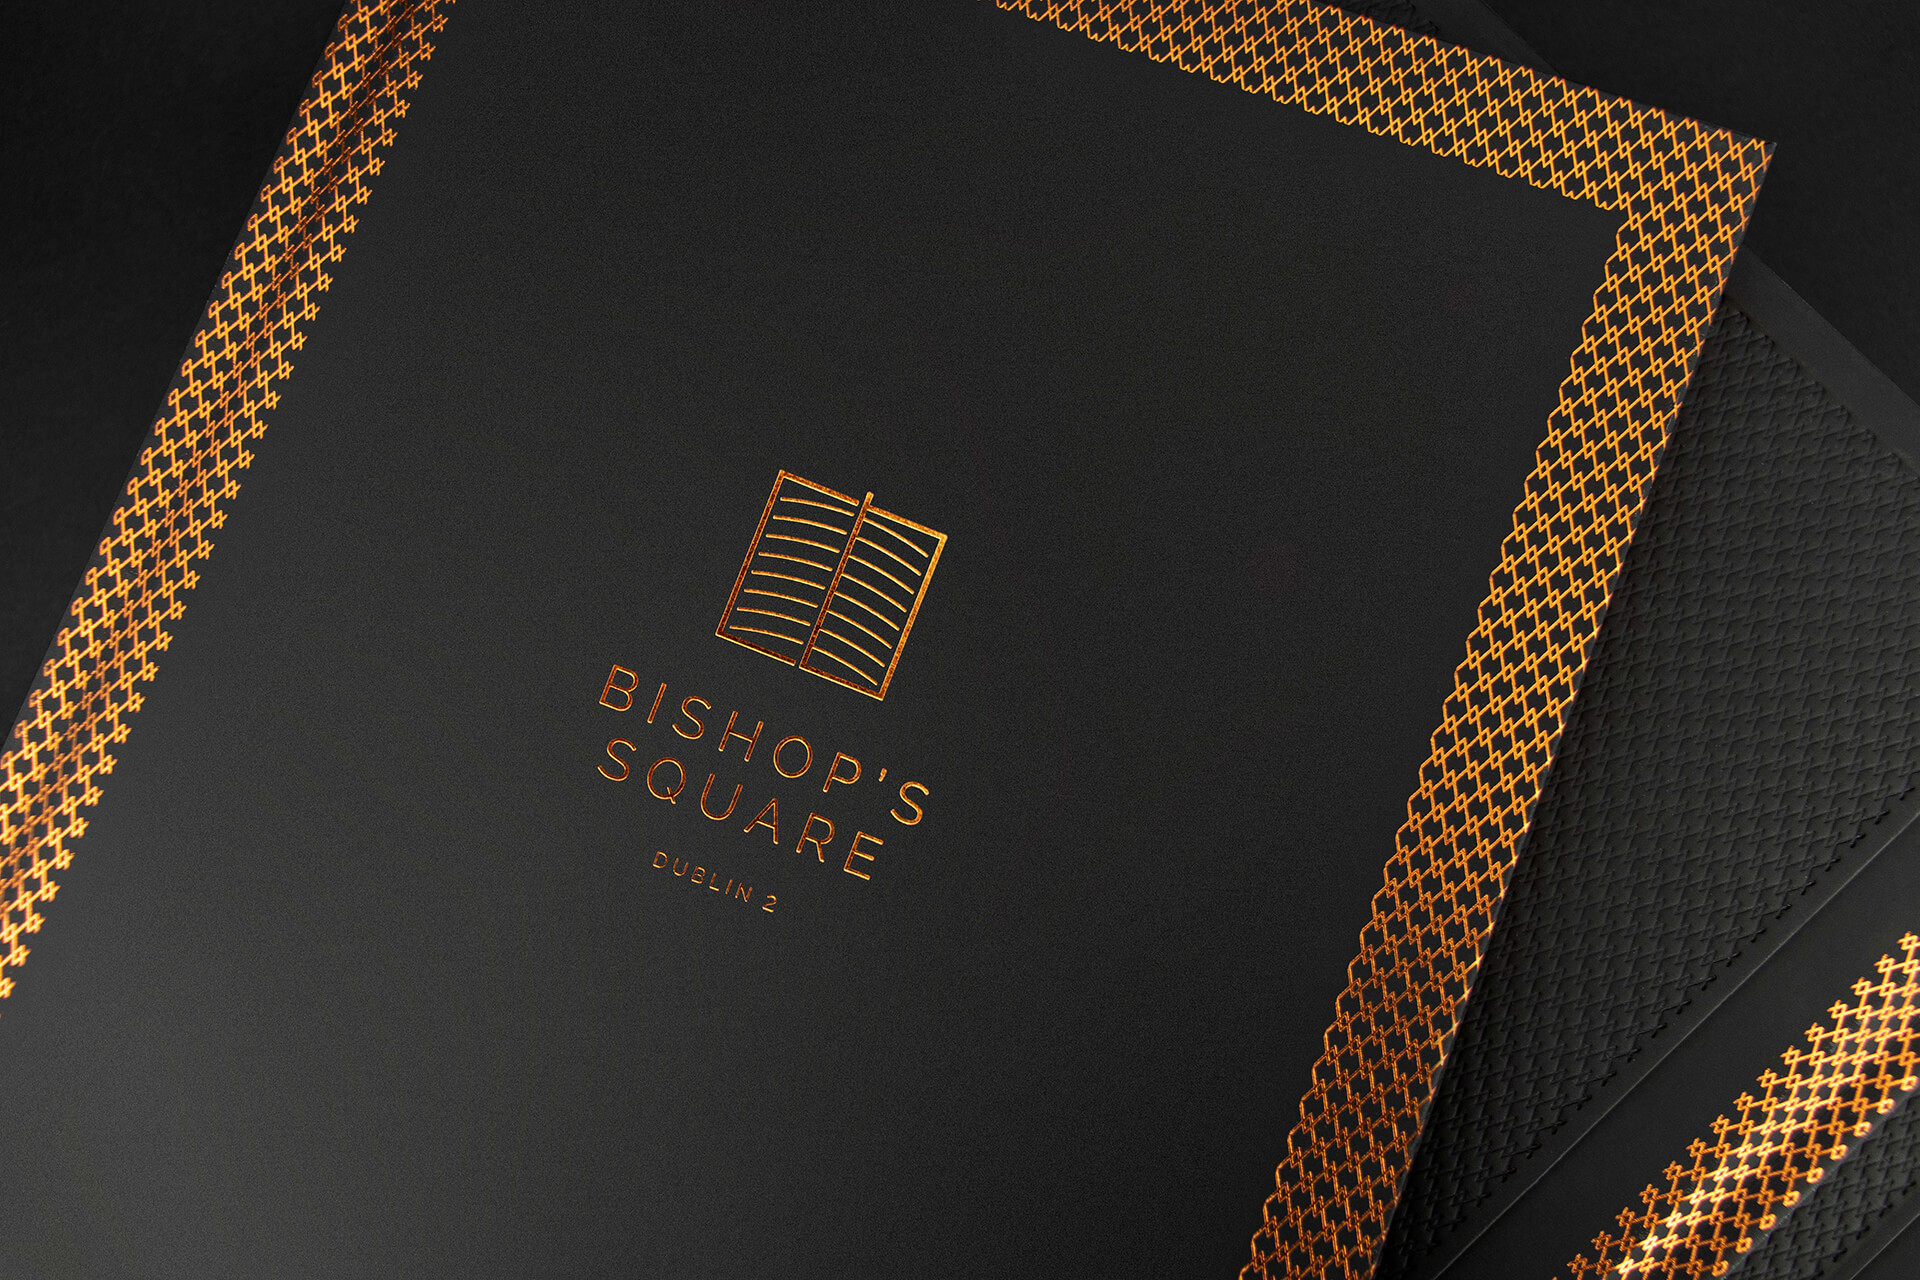 Bishop's Square brochure cover